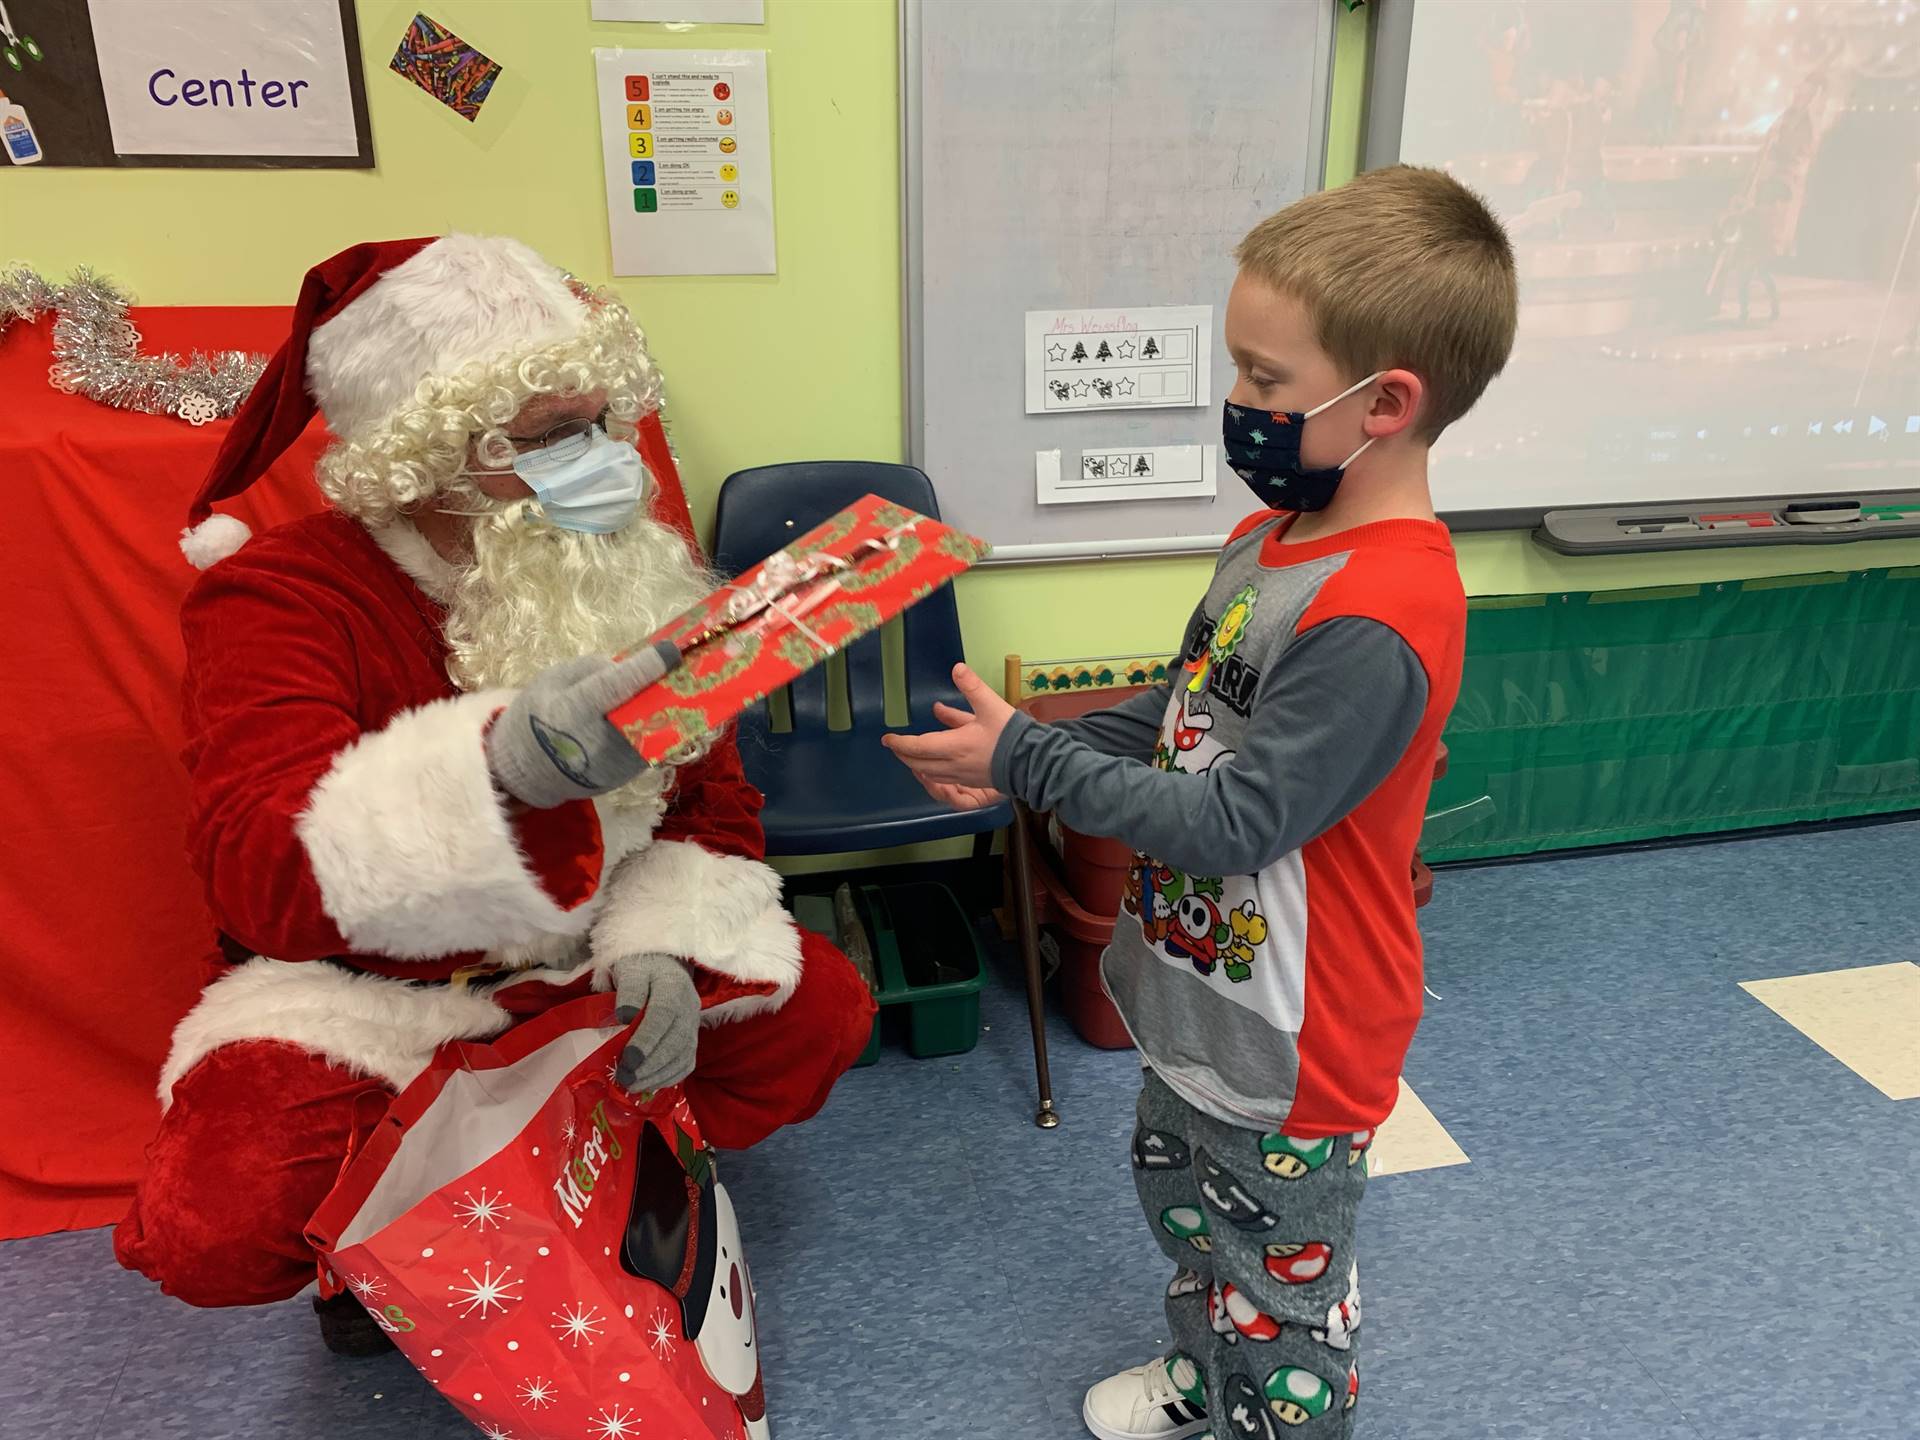 A student accepts a gift from Santa.